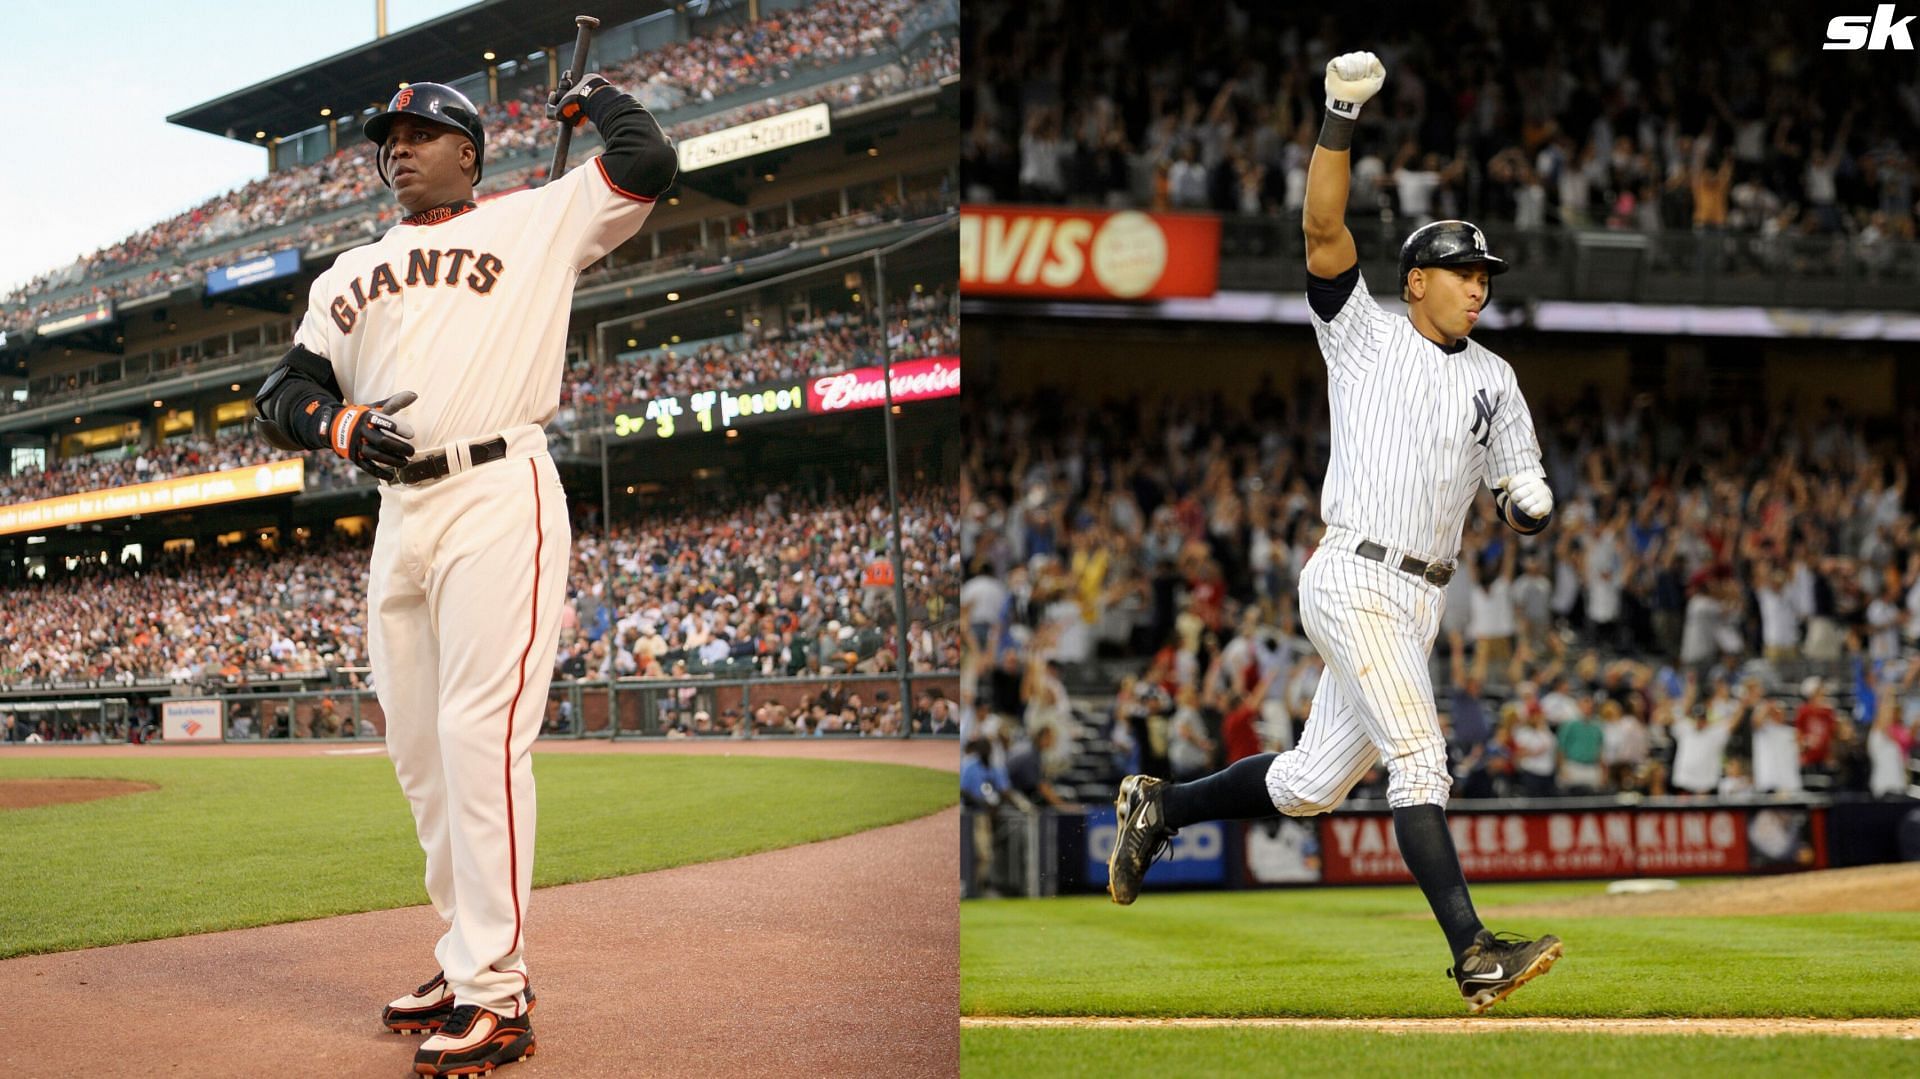 Barry Bonds and Alex Rodriguez are part of the 40-40 club